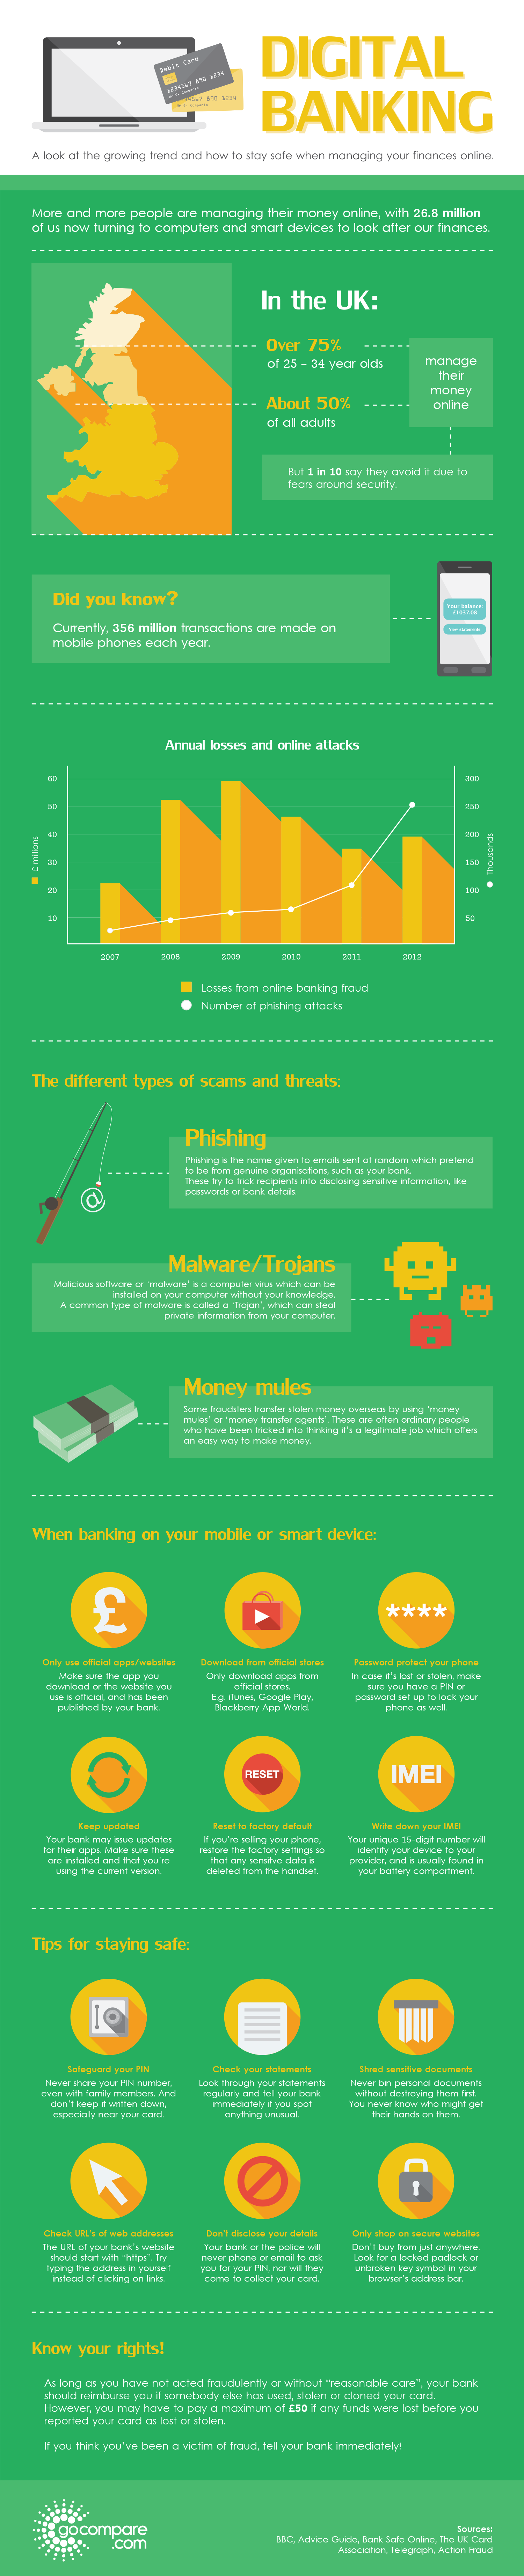 Card Fraud Black Friday Infographic